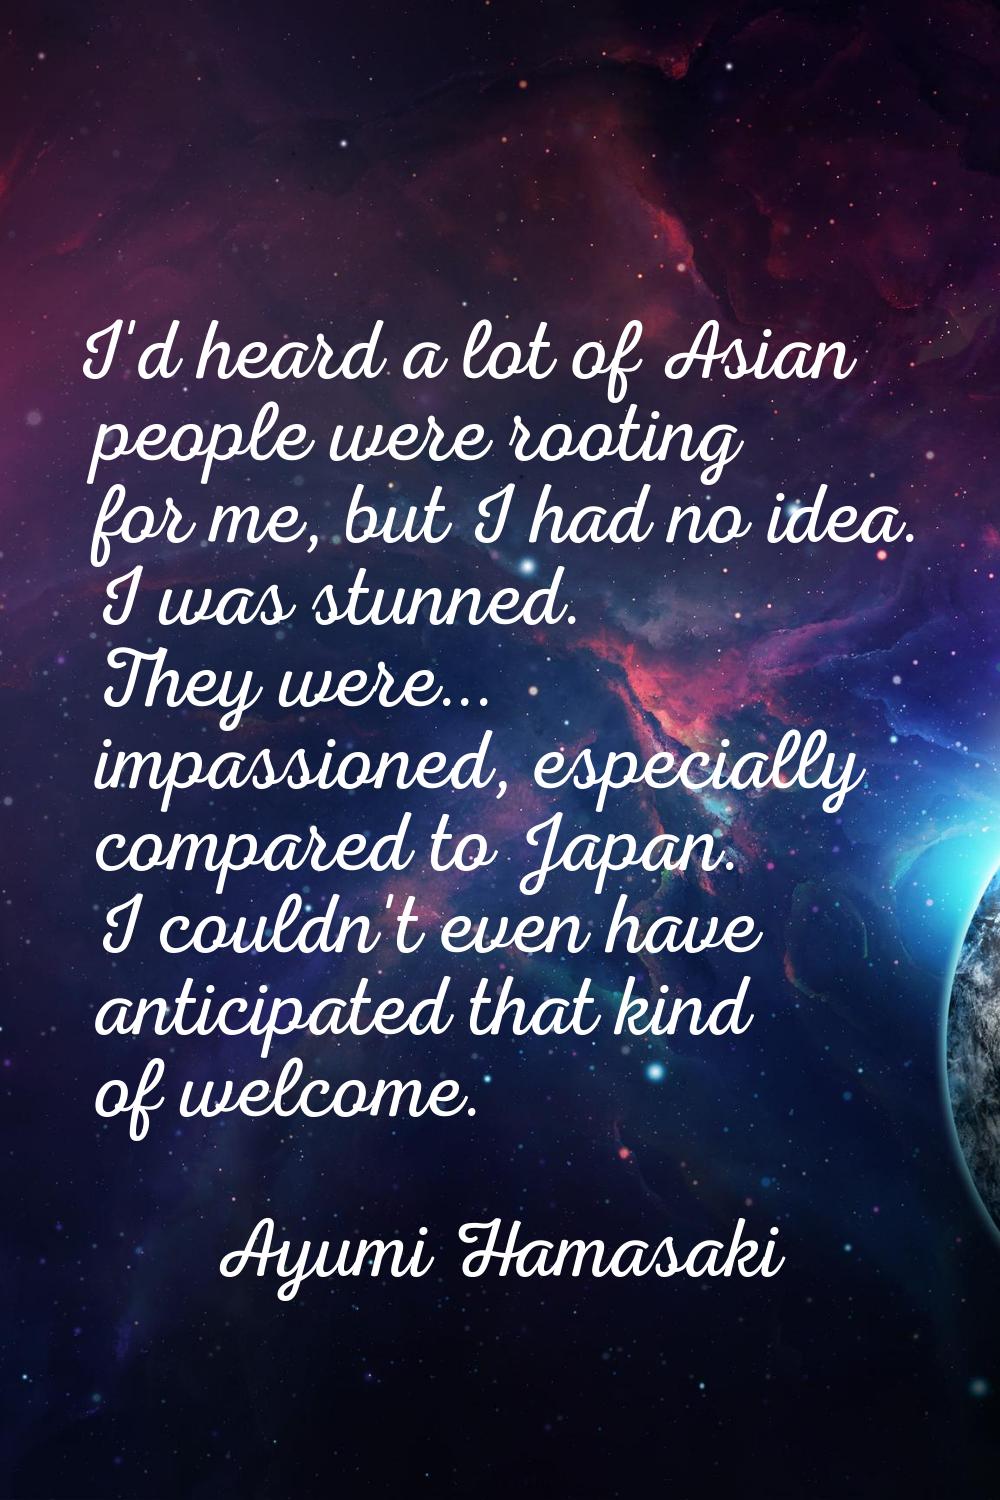 I'd heard a lot of Asian people were rooting for me, but I had no idea. I was stunned. They were...